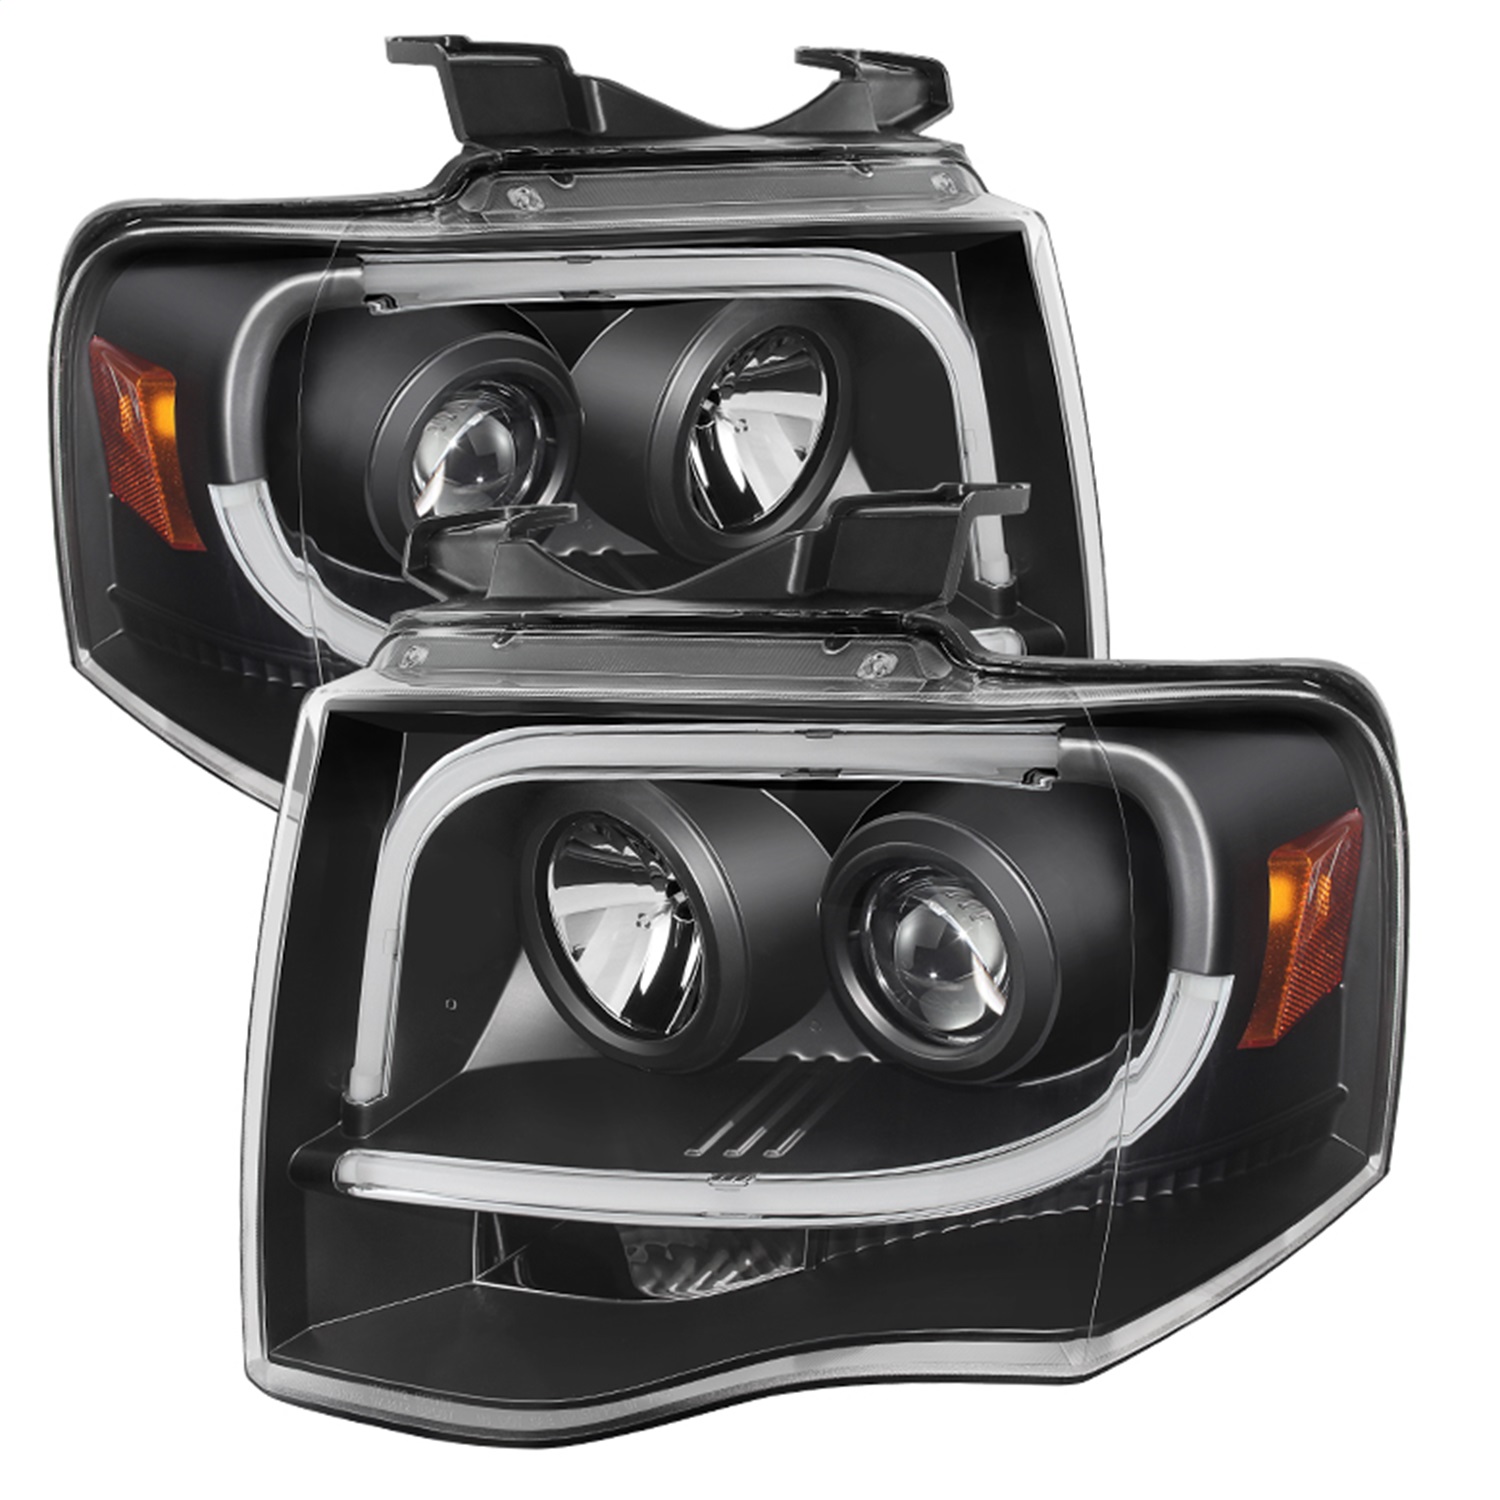 Spyder Auto 5079503 DRL Projector Headlights Fits 07-13 Expedition